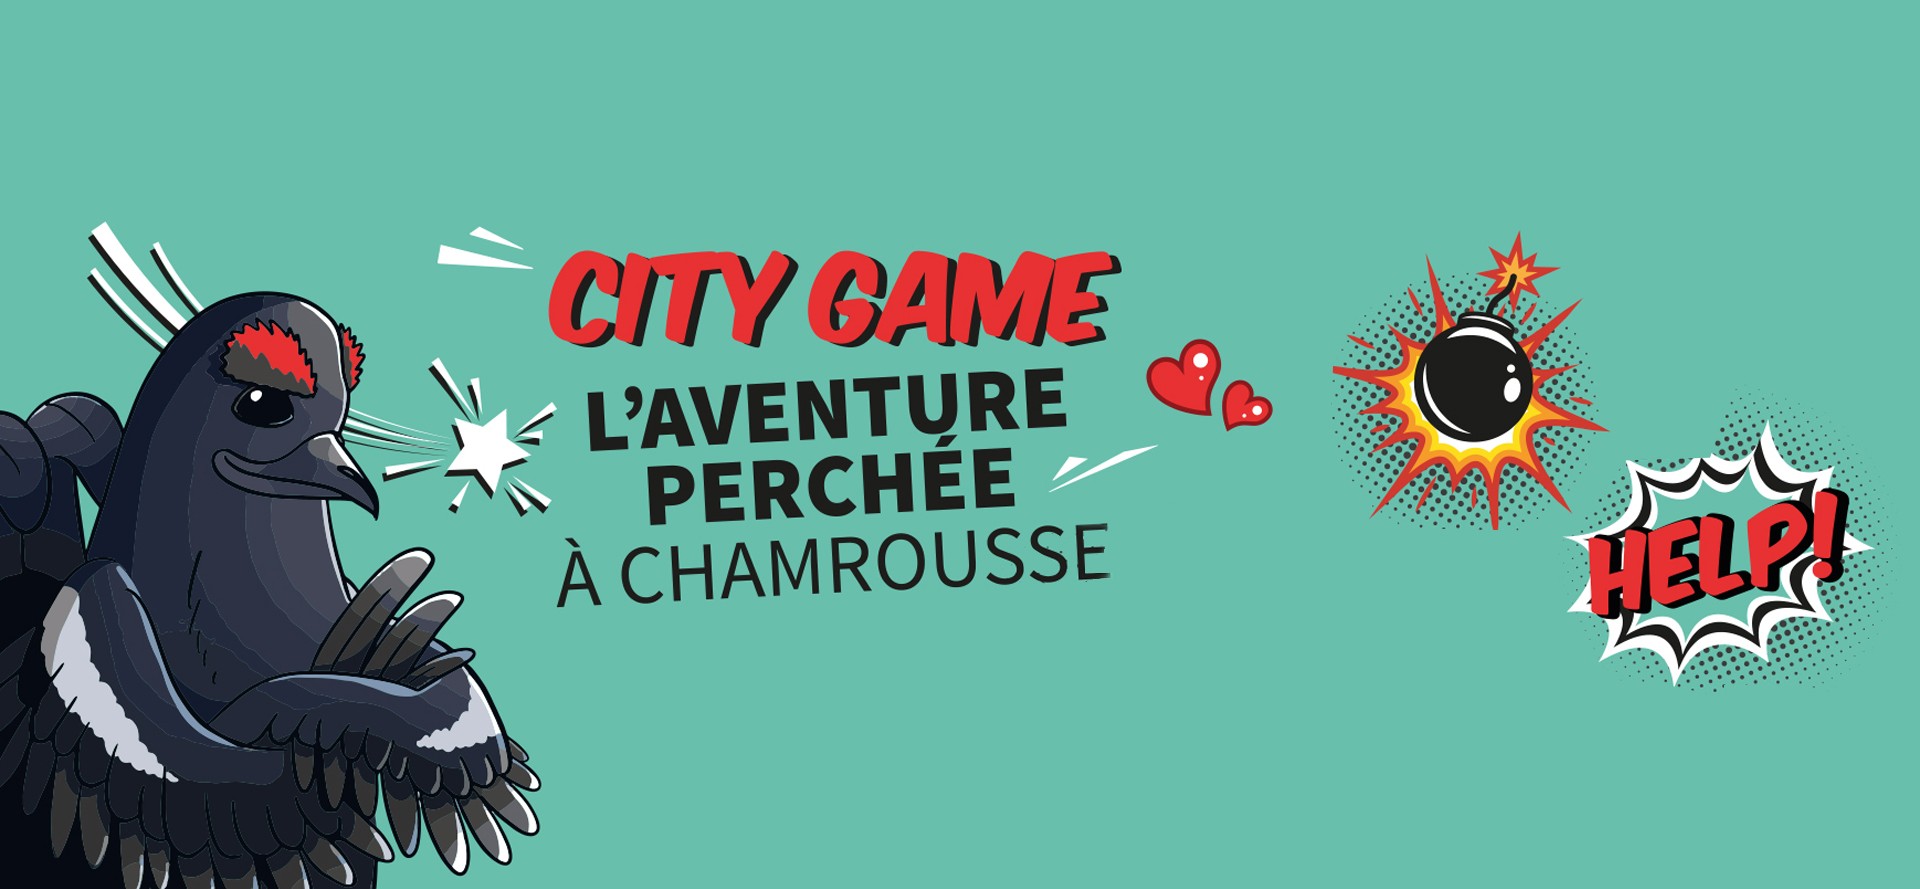 Chamrousse escape game - Adventure in the mountains